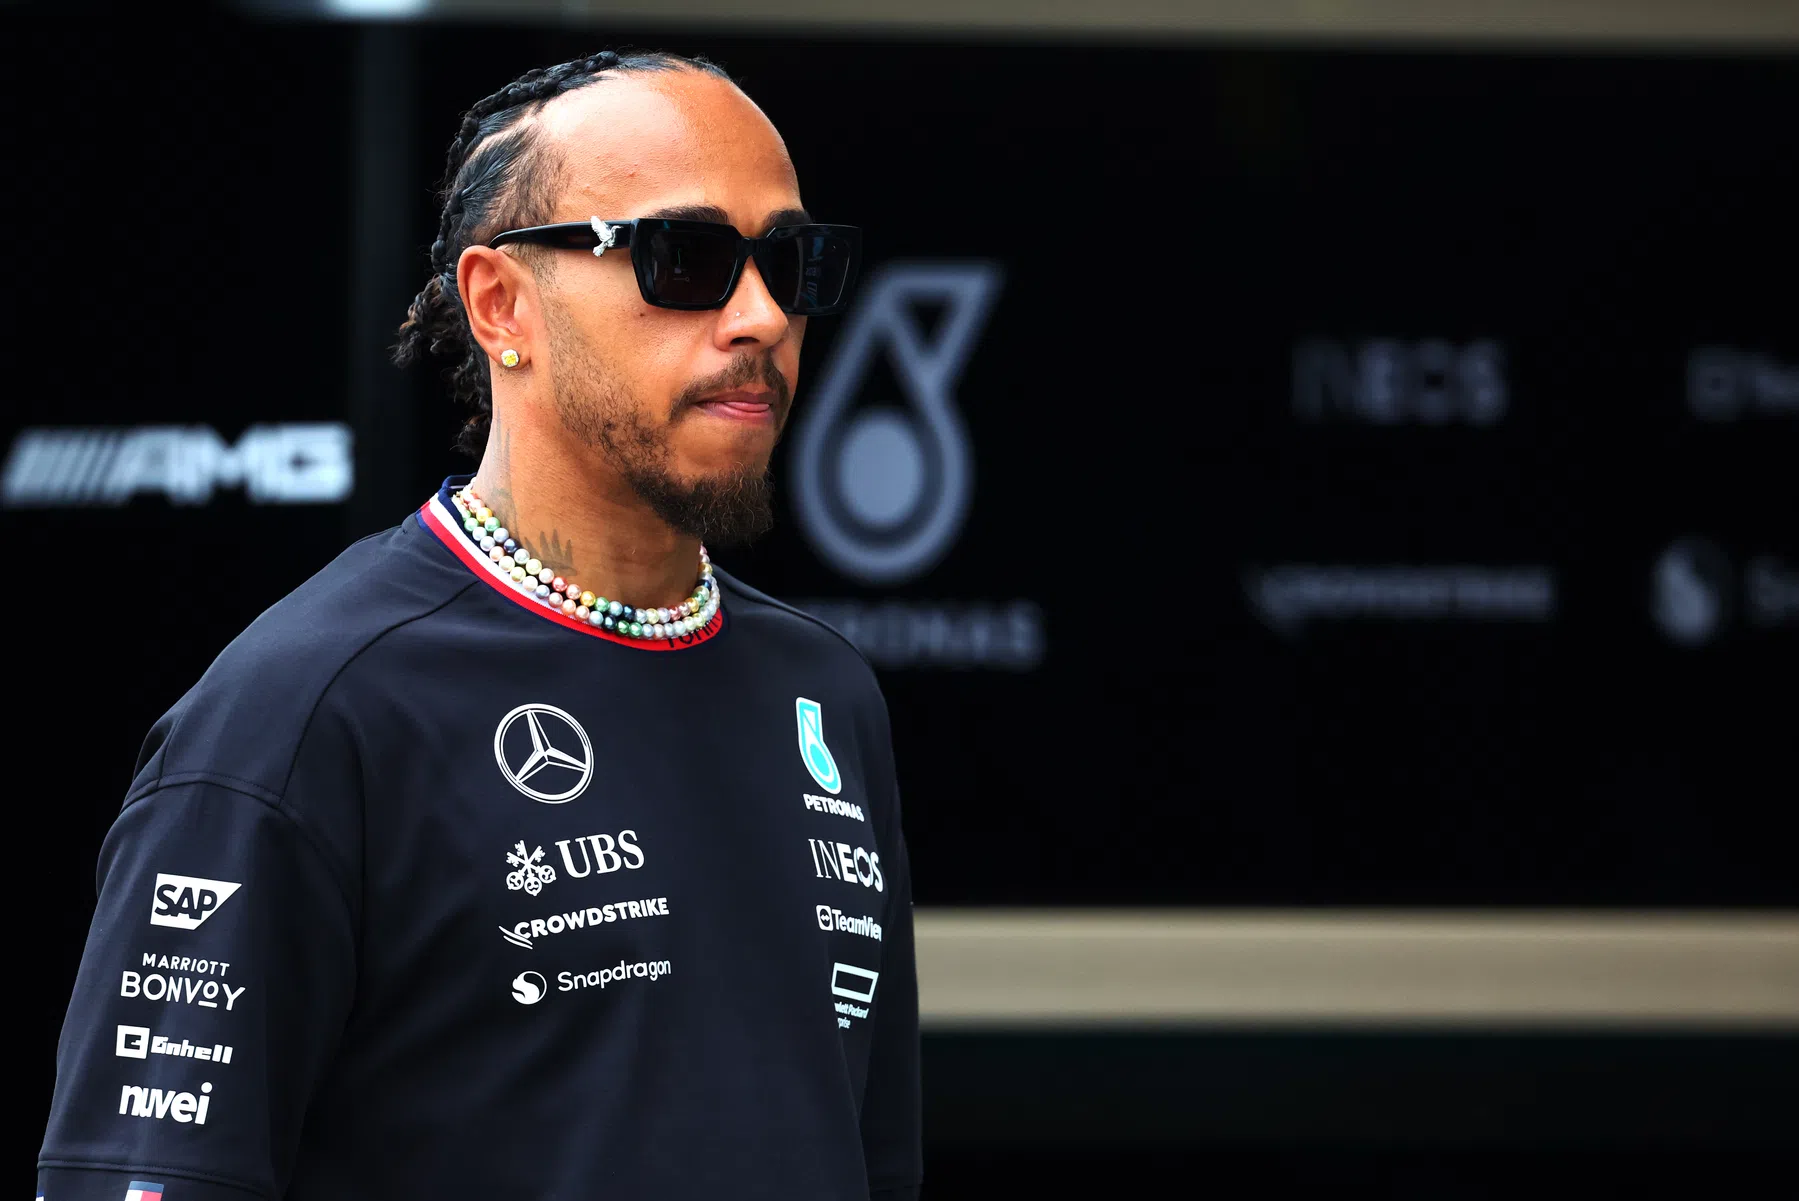 Hamilton explains why he didn't qualify better in Canada